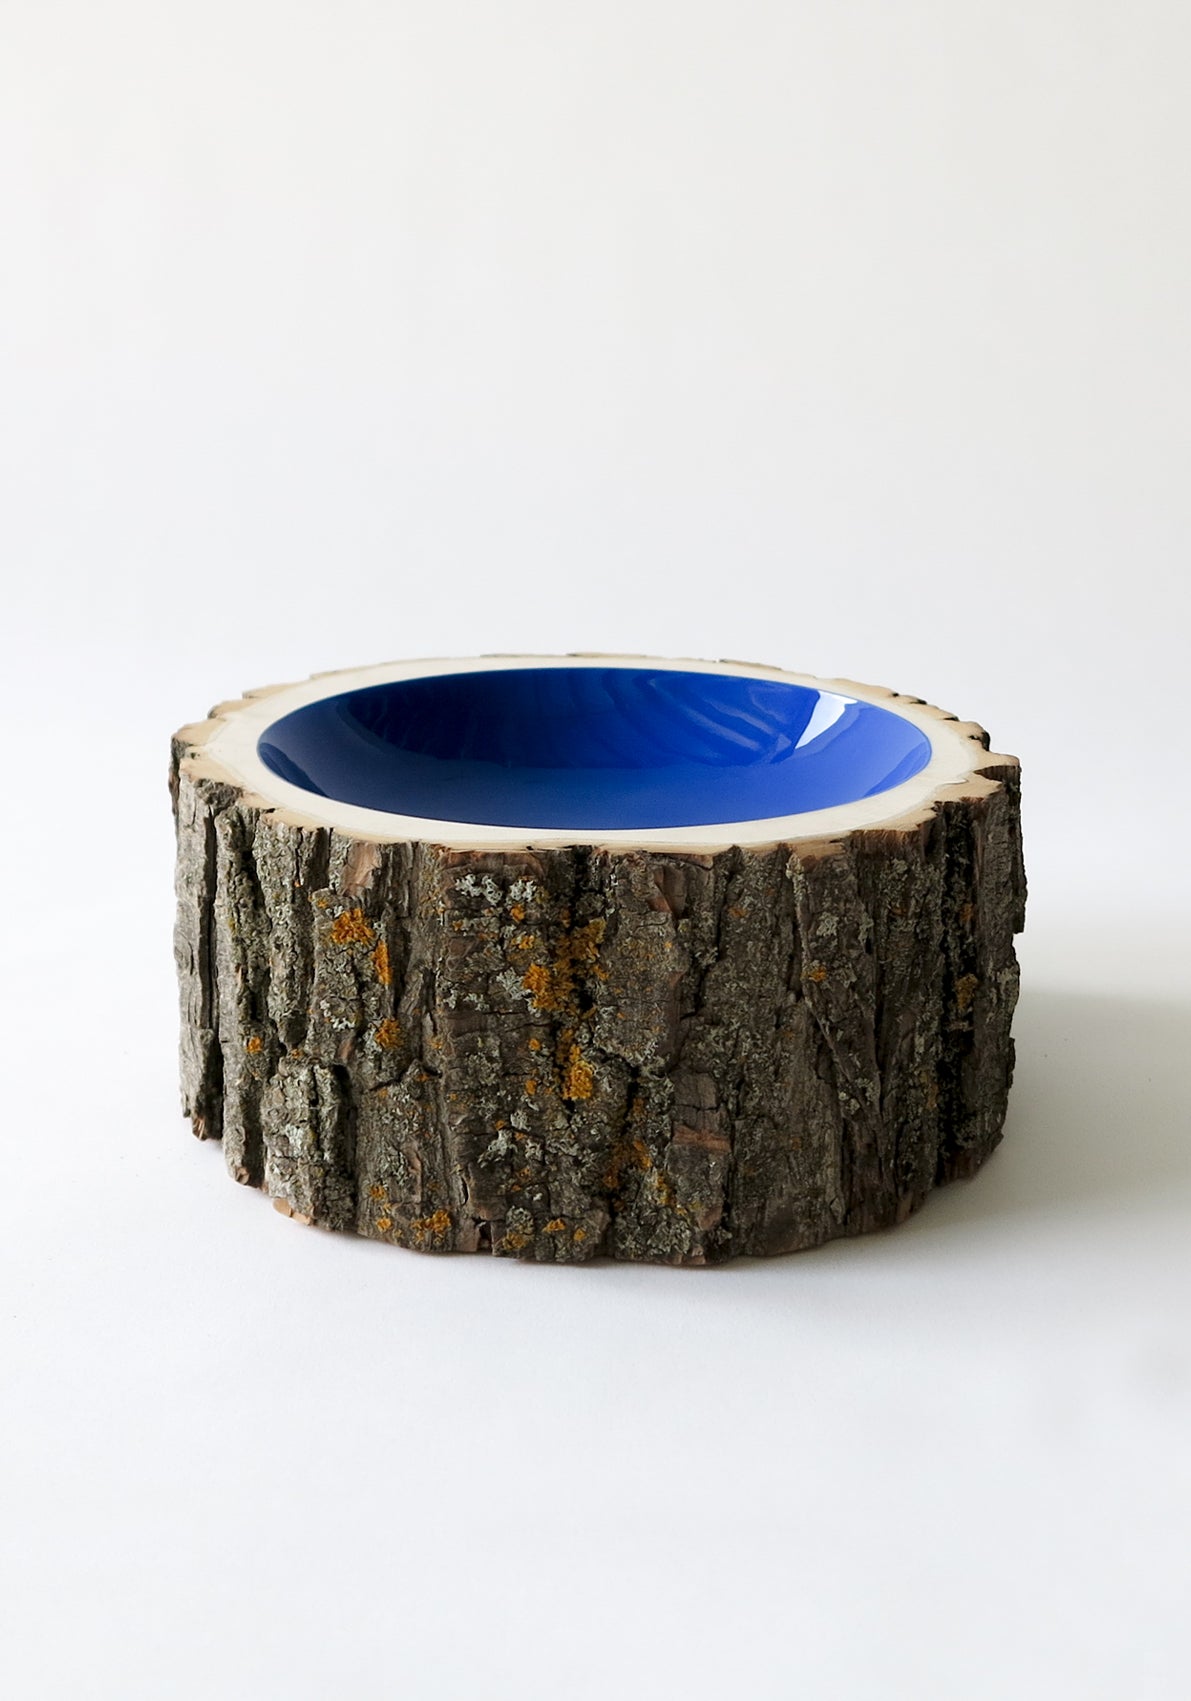 Size 8 Log Bowl - large wooden bowl with rough willow bark, glossy interior is bright cobalt blue.